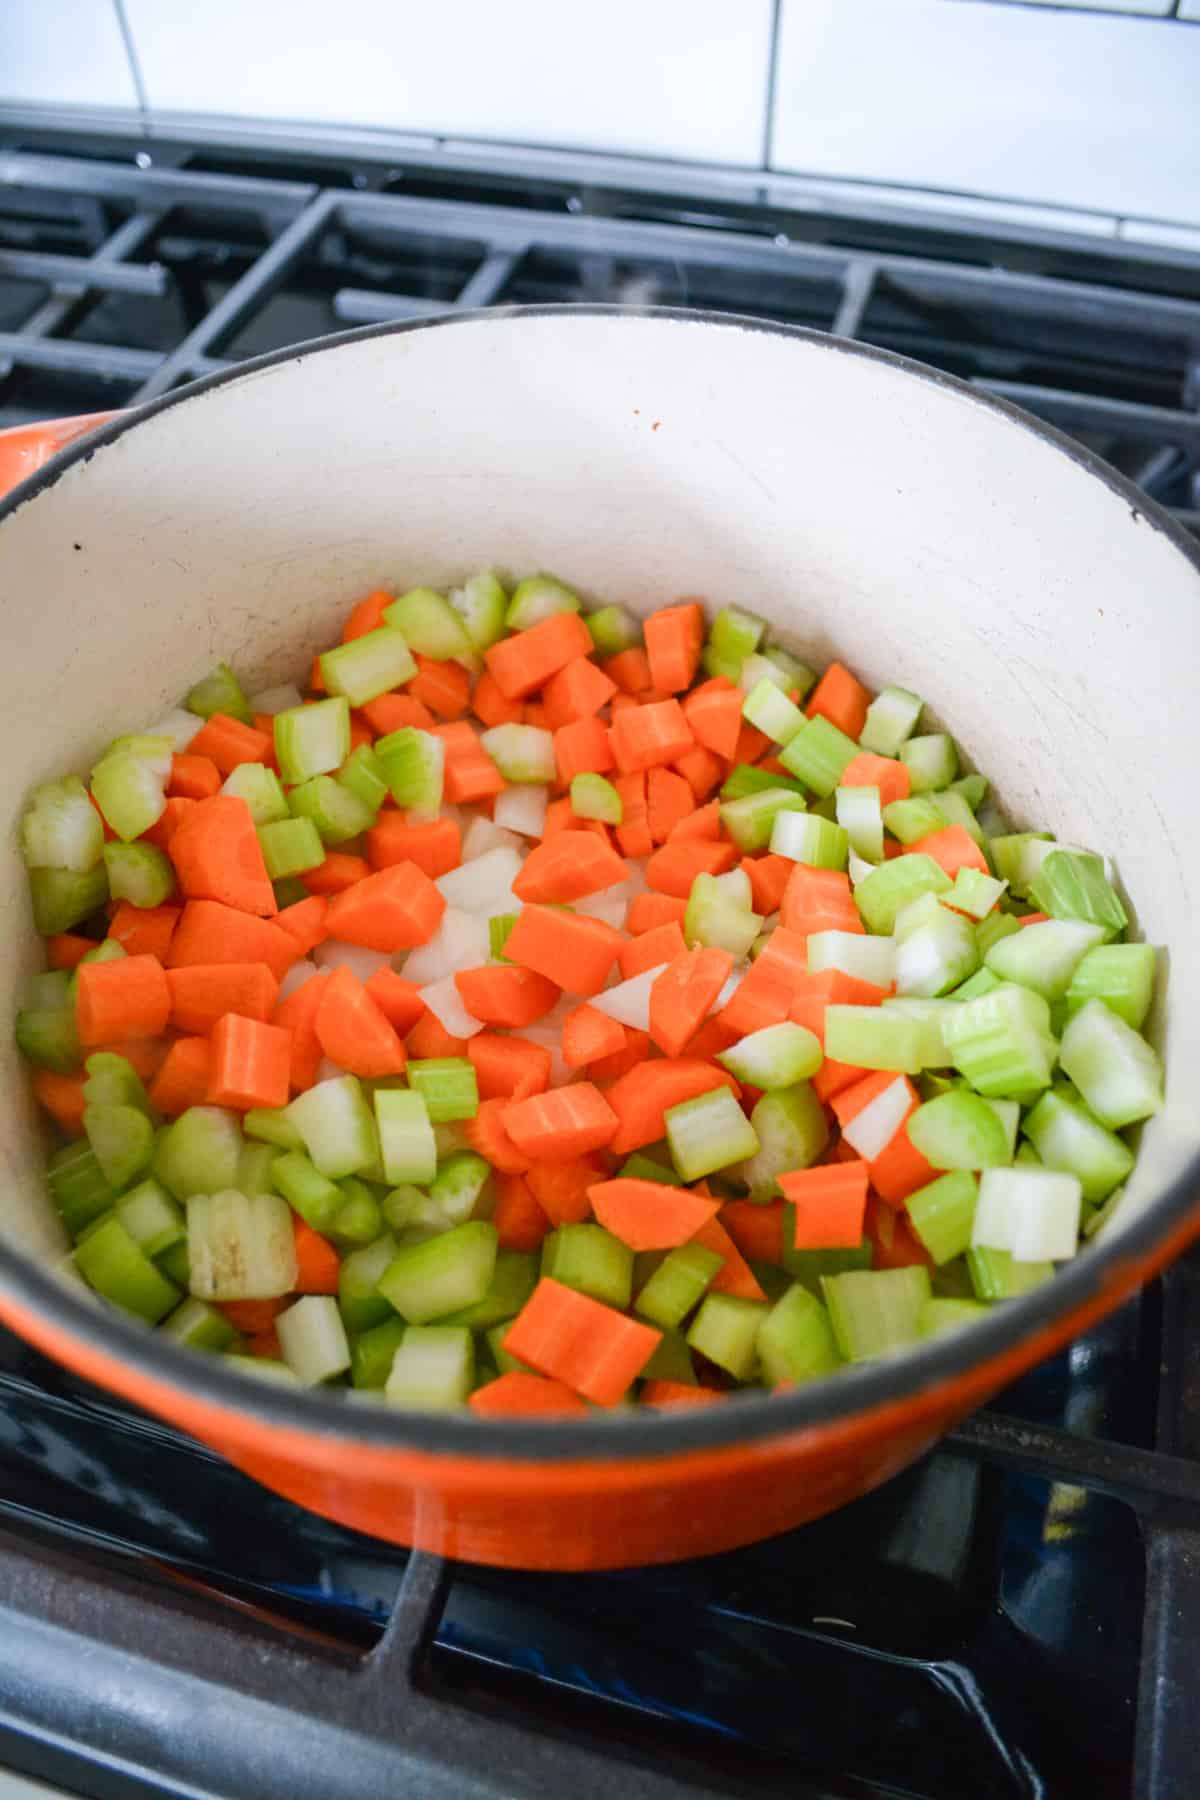 Onions, carrots and celery sautéing in an orange pot.